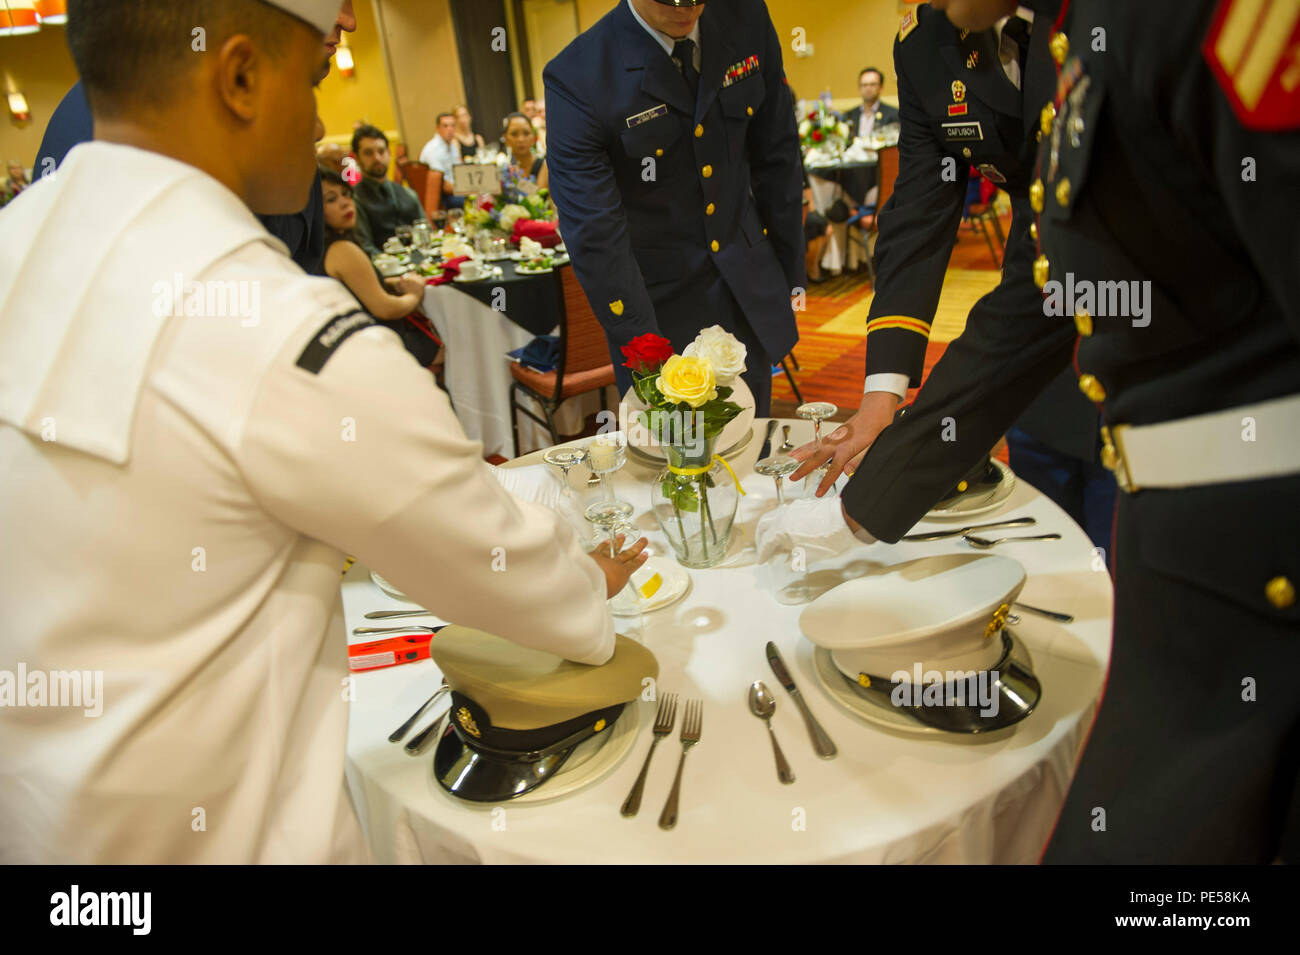 150925-N-HD670-284 OXNARD, Calif. (Sept. 25, 2015) - Service members participate in a Prisoner of War, Missing in Action (POW/MIA), observance during a military appreciation dinner. The 18th annual dinner, hosted by the Oxnard Chamber of Commerce, was held to recognize active duty and retired service members from the communities around Naval Base Ventura County. (U.S. Navy photo by Utilitiesman 3rd Class Stephen Sisler/Released) Stock Photo